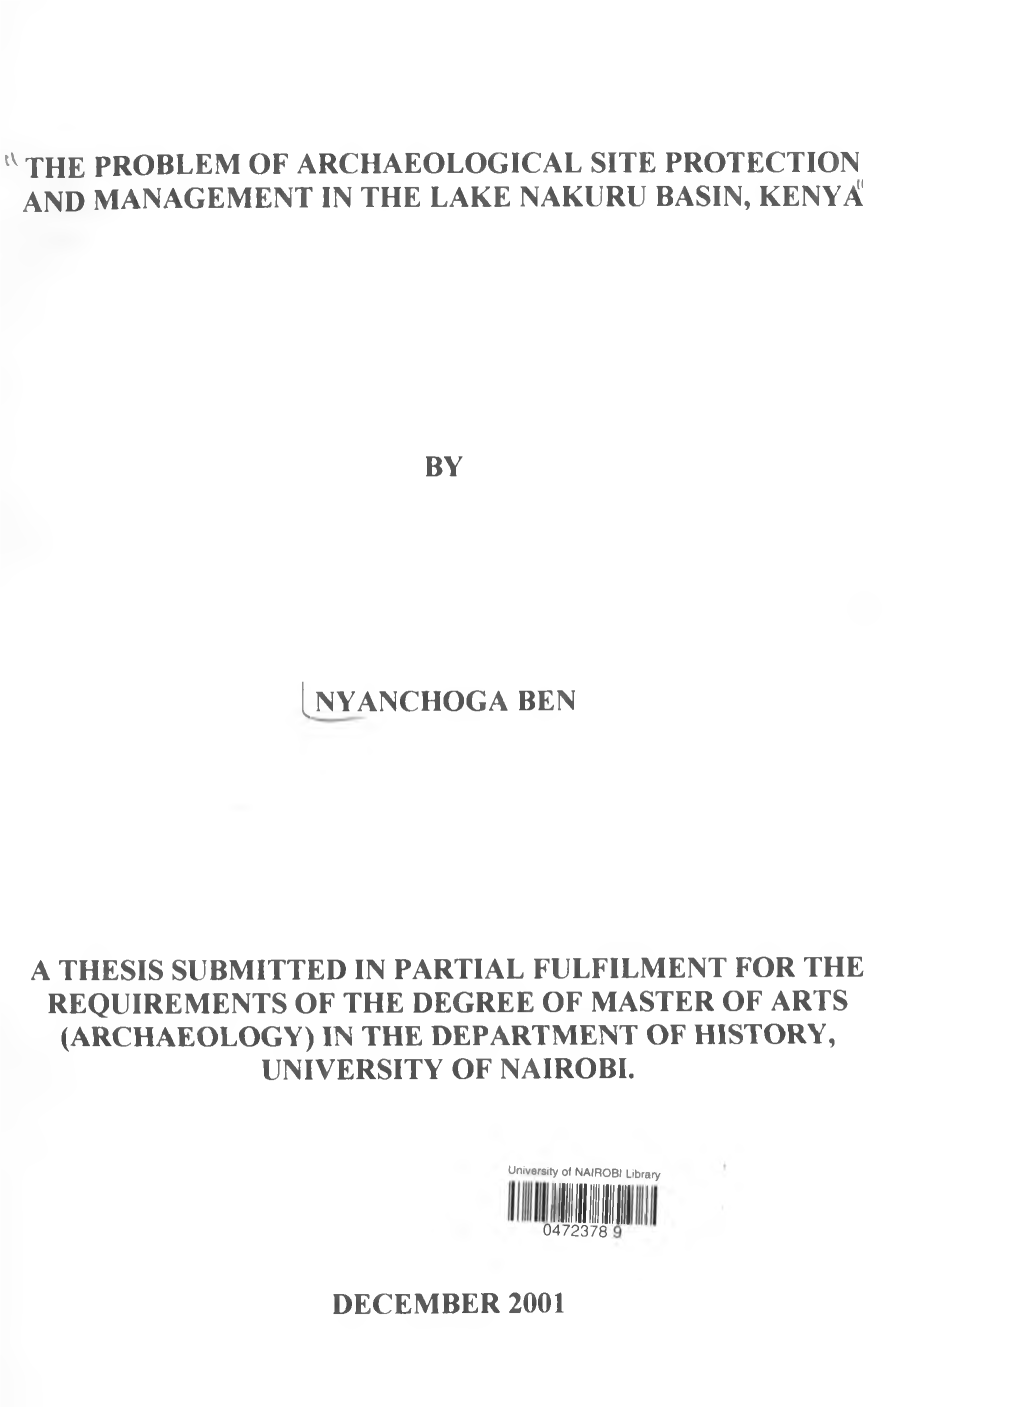 Tv the PROBLEM of ARCHAEOLOGICAL SITE PROTECTION and MANAGEMENT in the LAKE NAKURU BASIN, KENYA by a THESIS SUBMITTED in PARTIAL